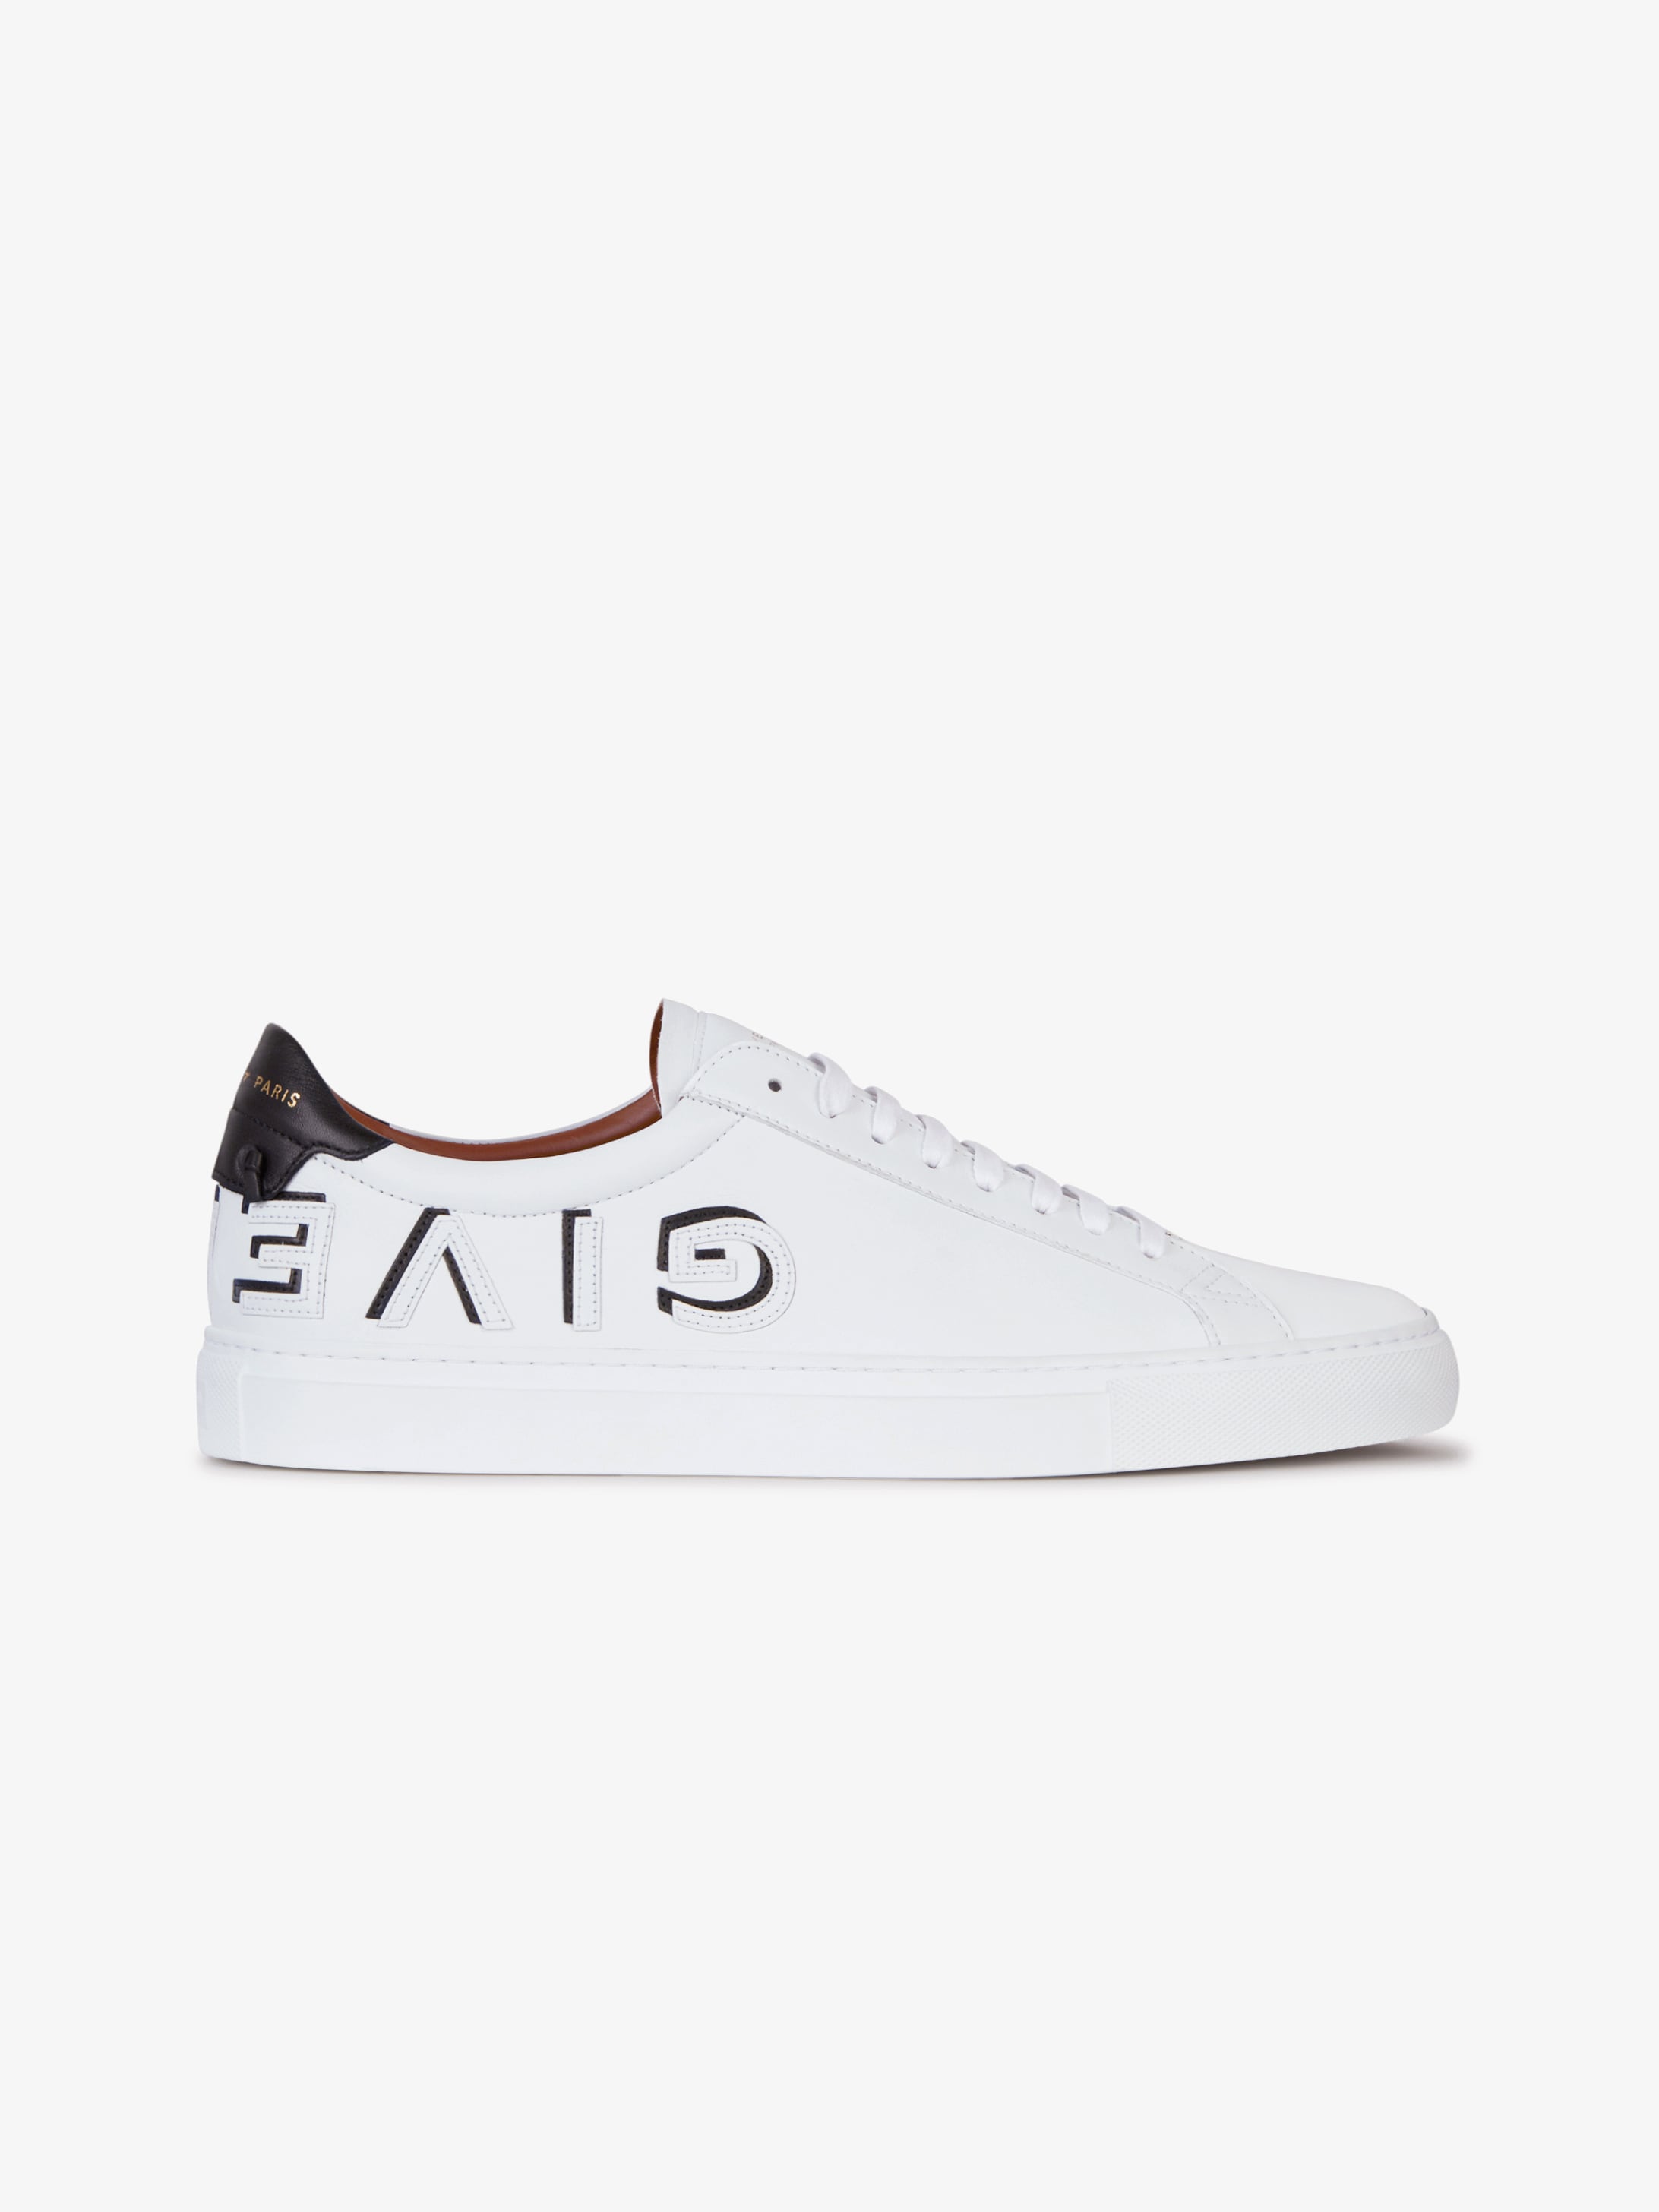 givenchy shoes sale